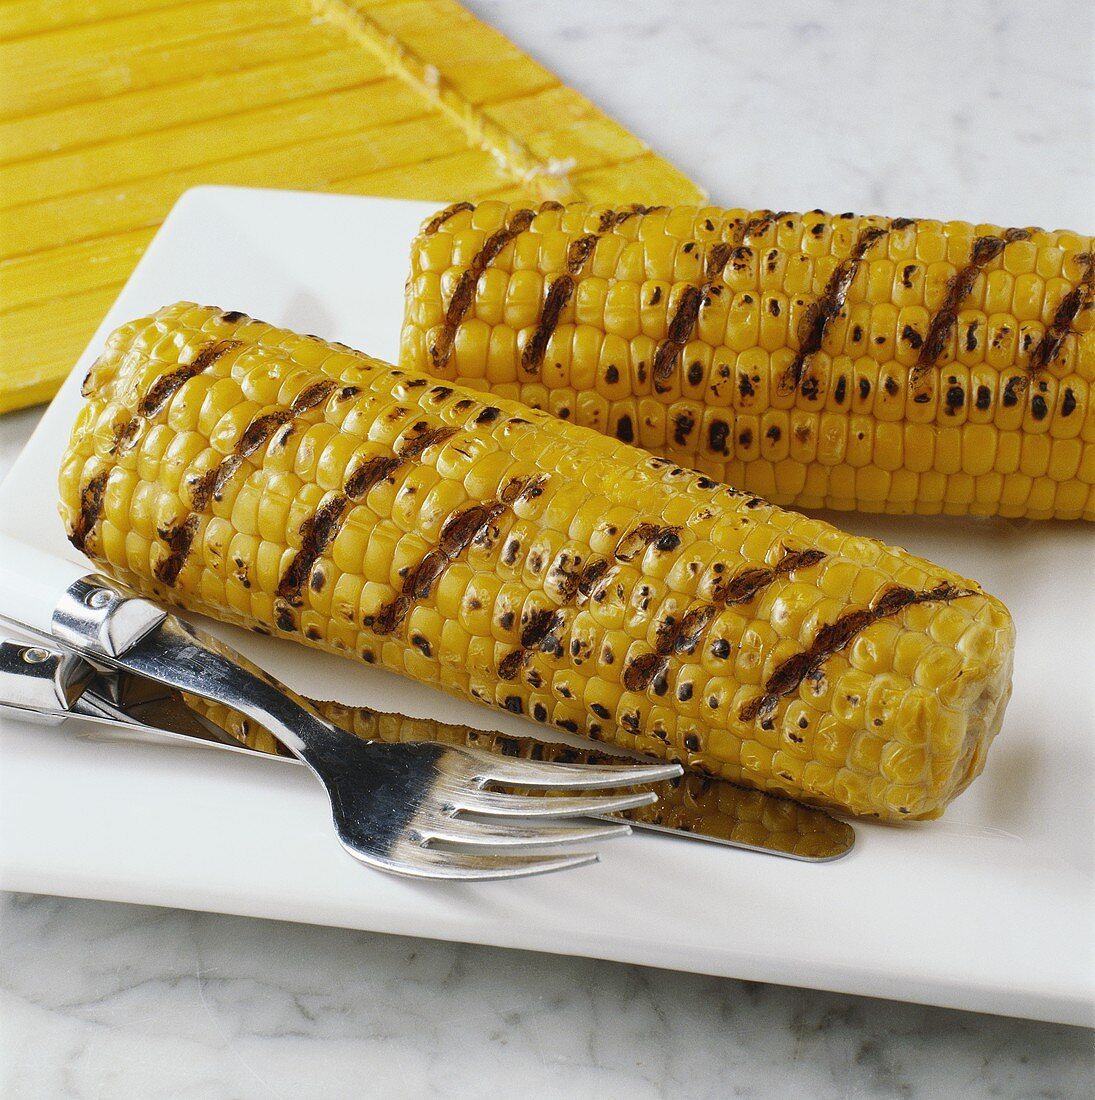 Barbecued corncobs